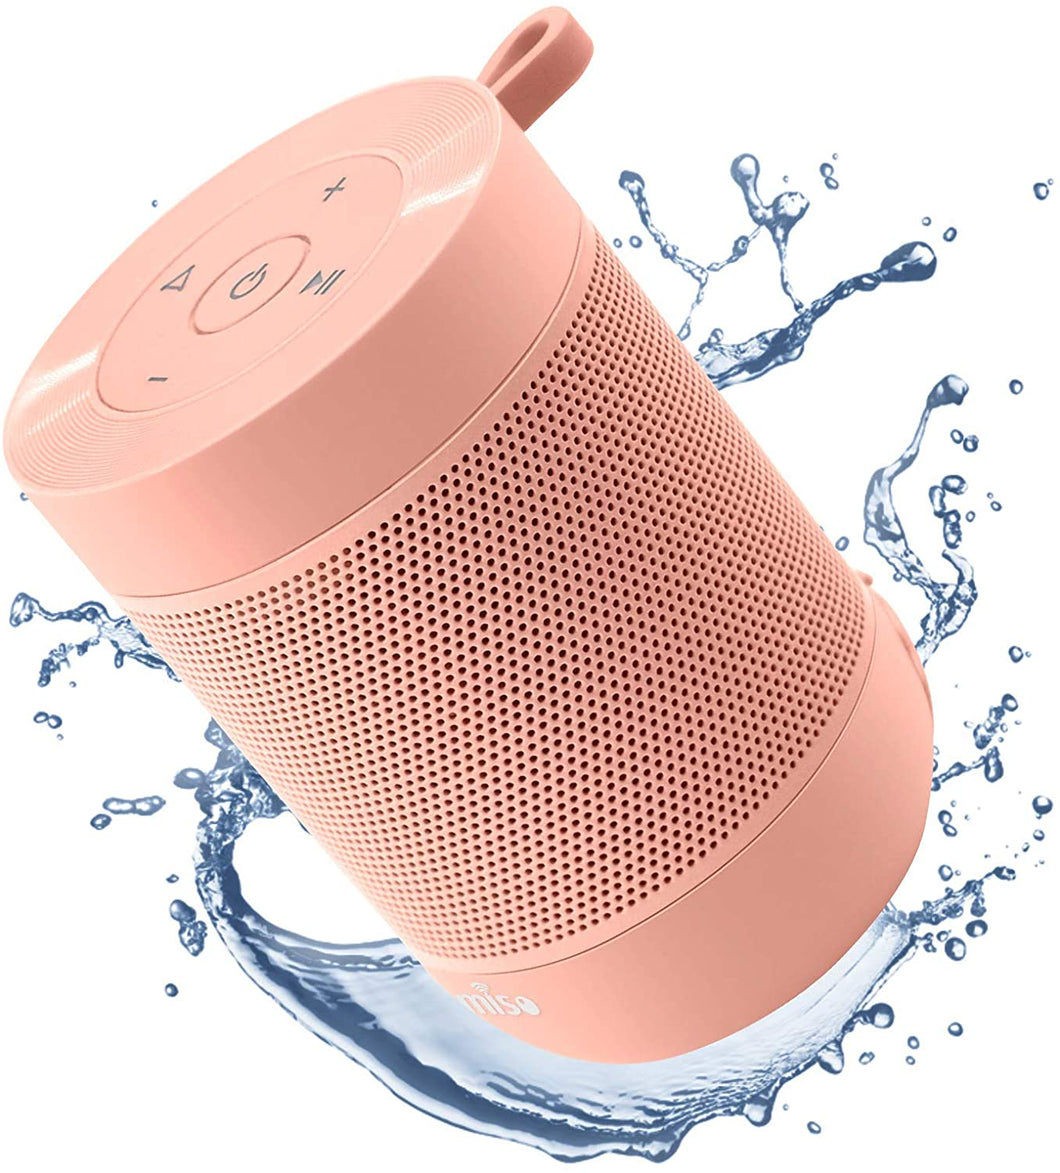 Portable Bluetooth Speaker, COMISO Bluetooth Wireless Mini Pocket Speaker, 360 HD Surround Sound & Rich Stereo Bass, 12H Playtime, IPX5 Waterproof for Travel, Outdoors, Home and Party (Pink)